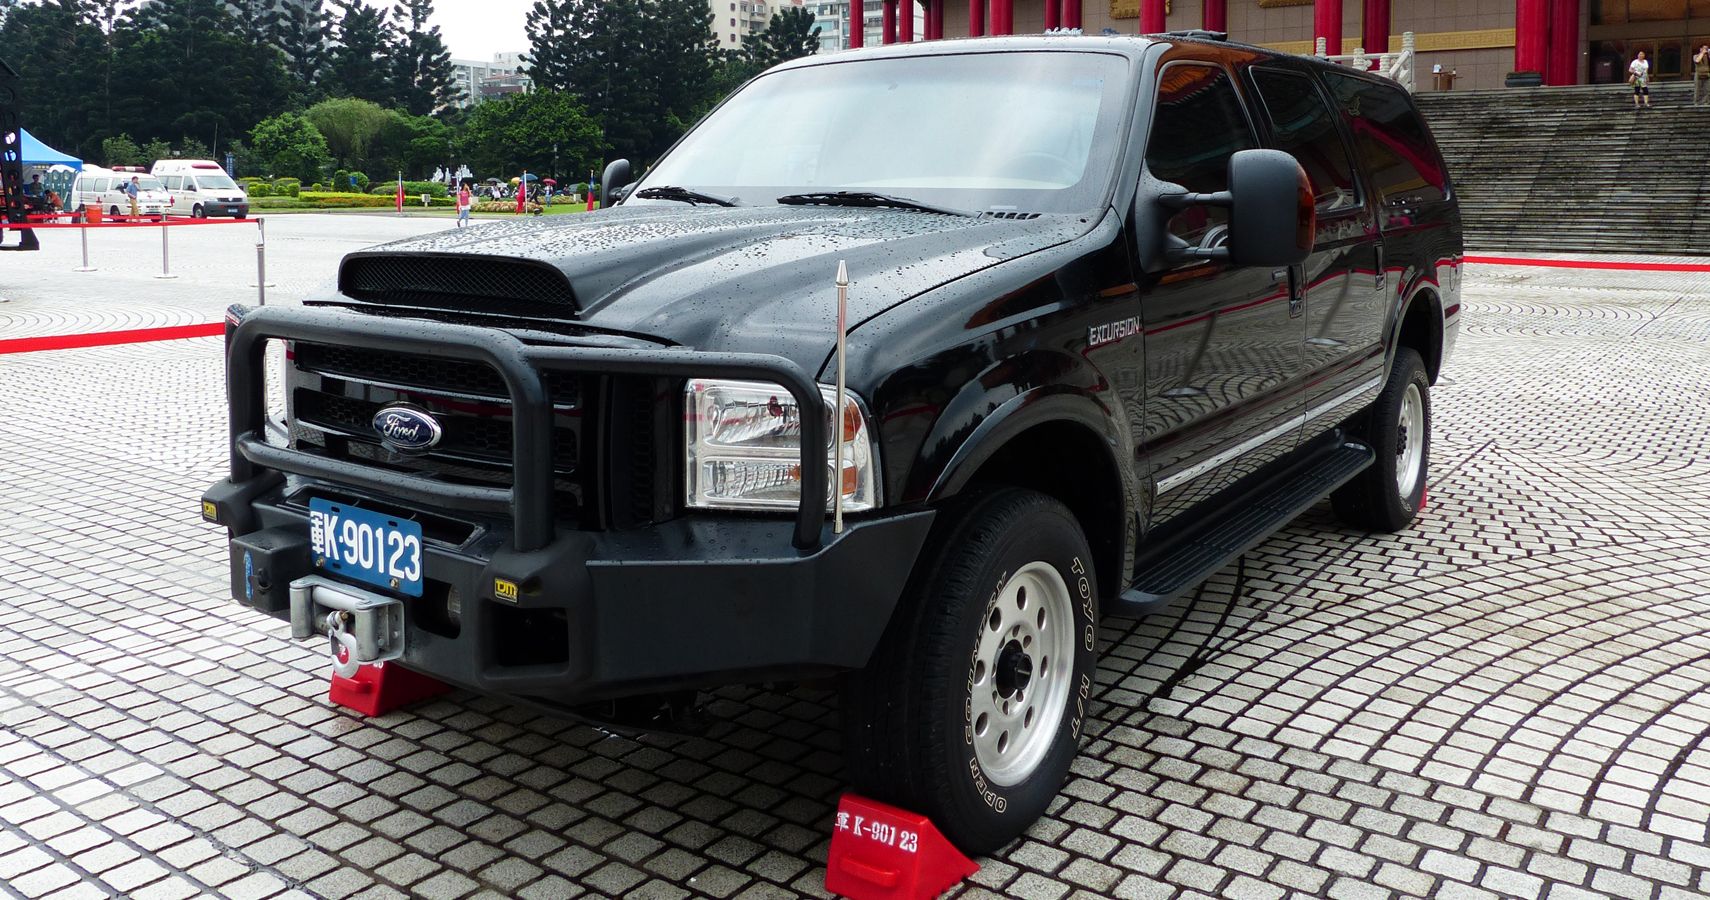 Black armored Ford Excursion in Taiwan